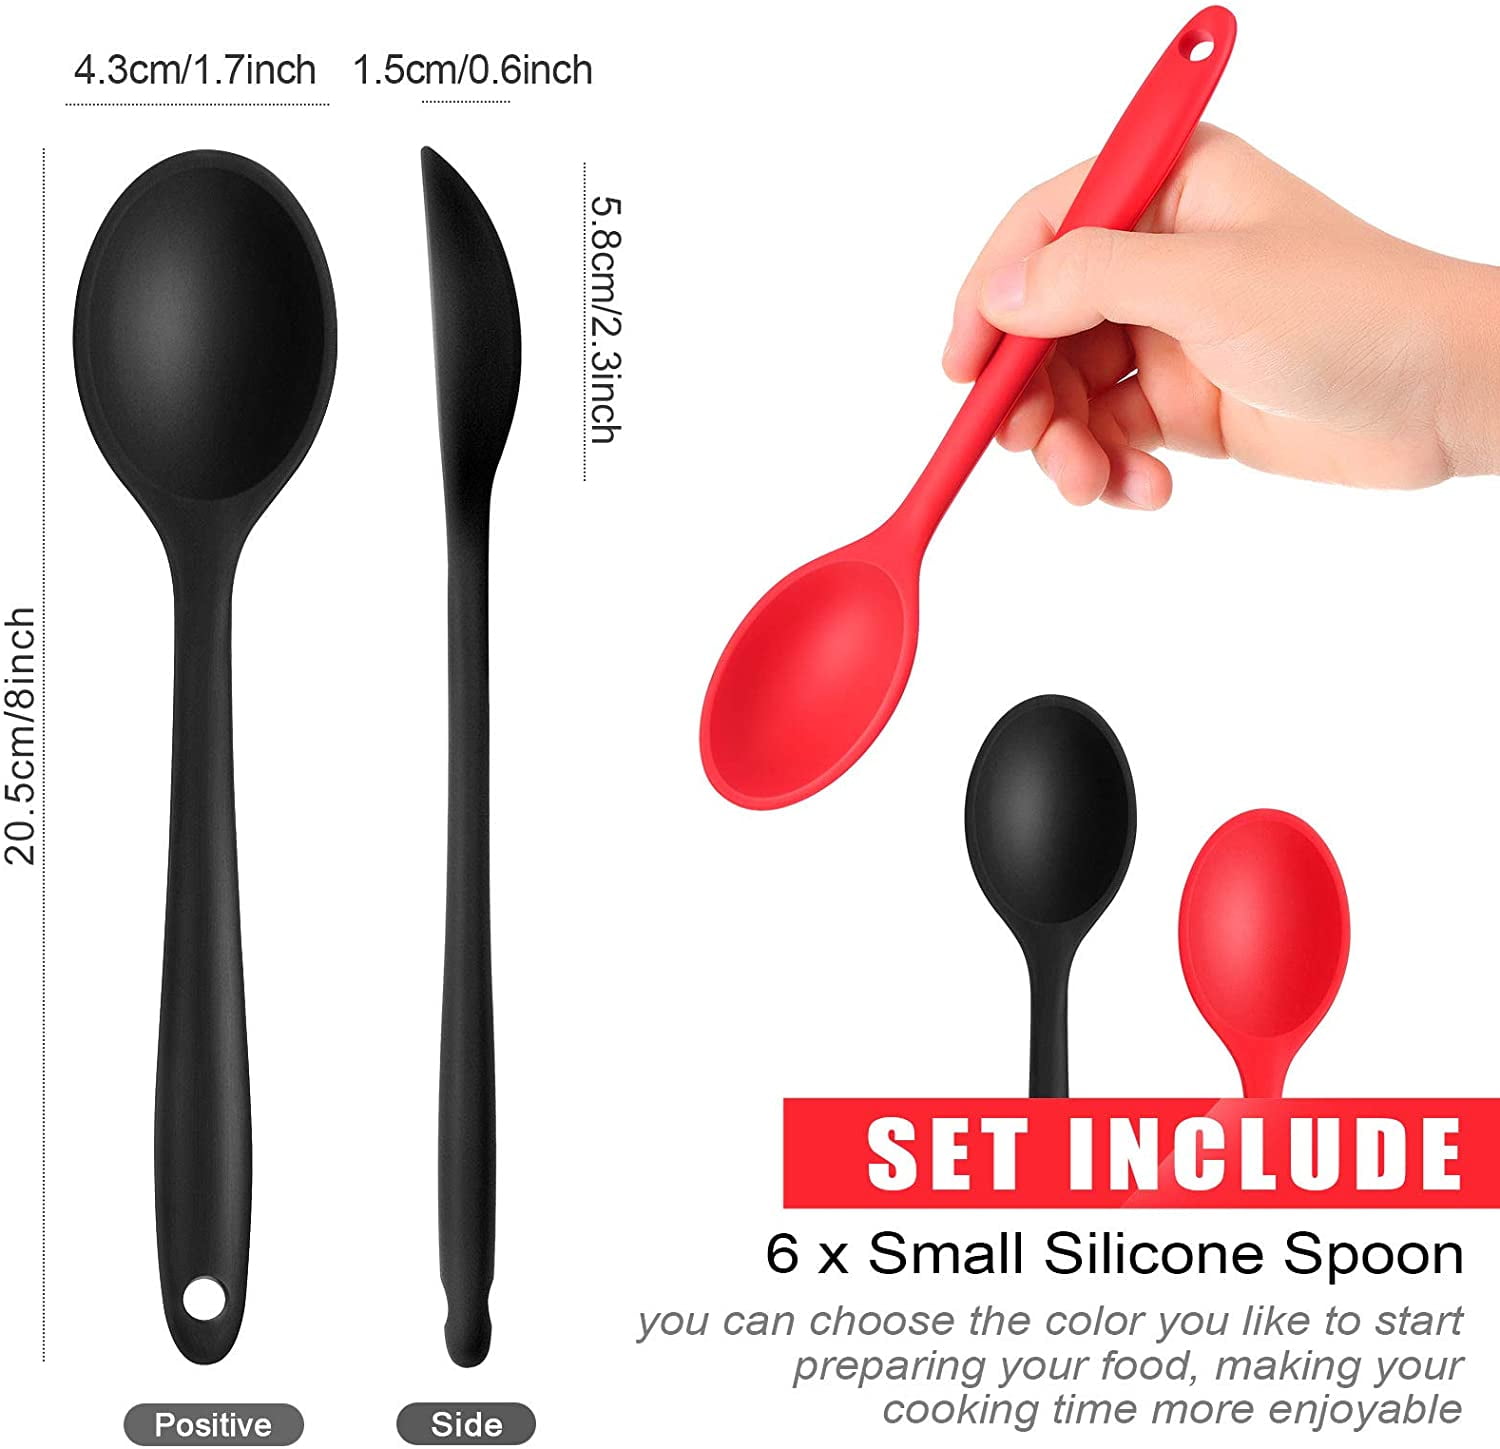 6 Pieces Small Multicolored Silicone Spoons Nonstick Kitchen Spoon Silicone Serving Spoon Stirring Spoon for Kitchen Cooking Baking Stirring Mixing Tools Red, Black 